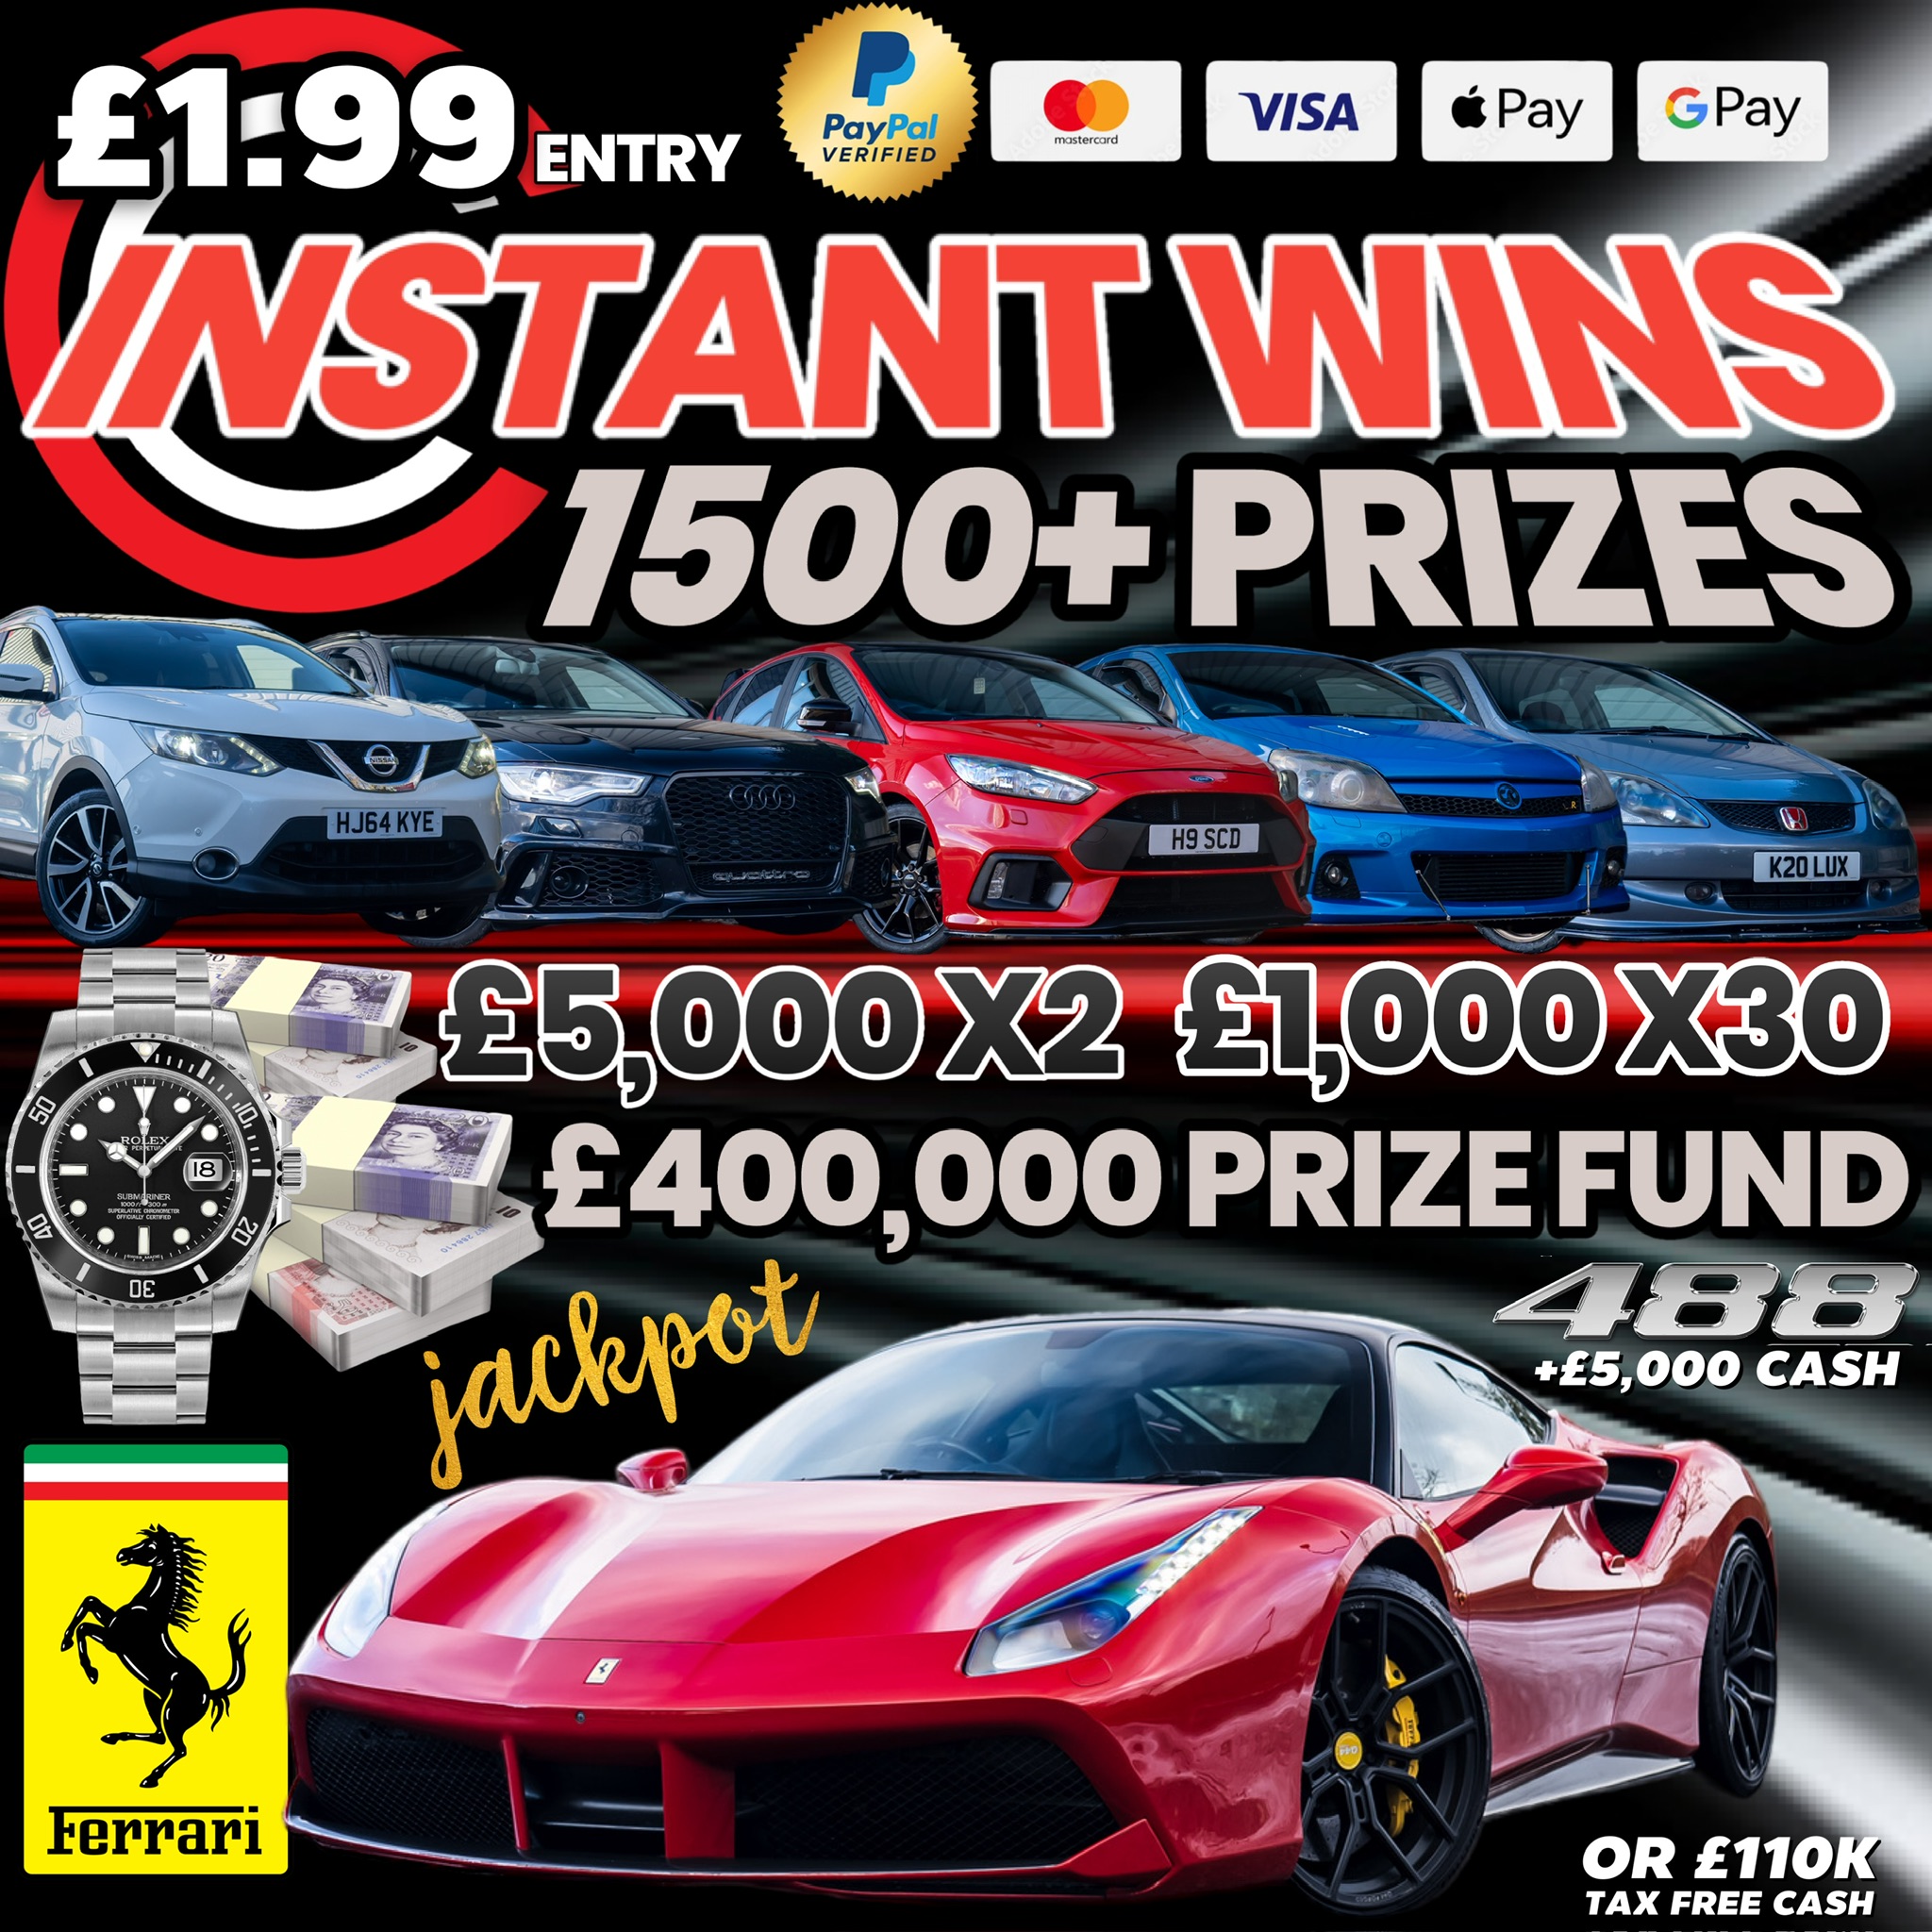 Instant Wins Archives - Click Competitions